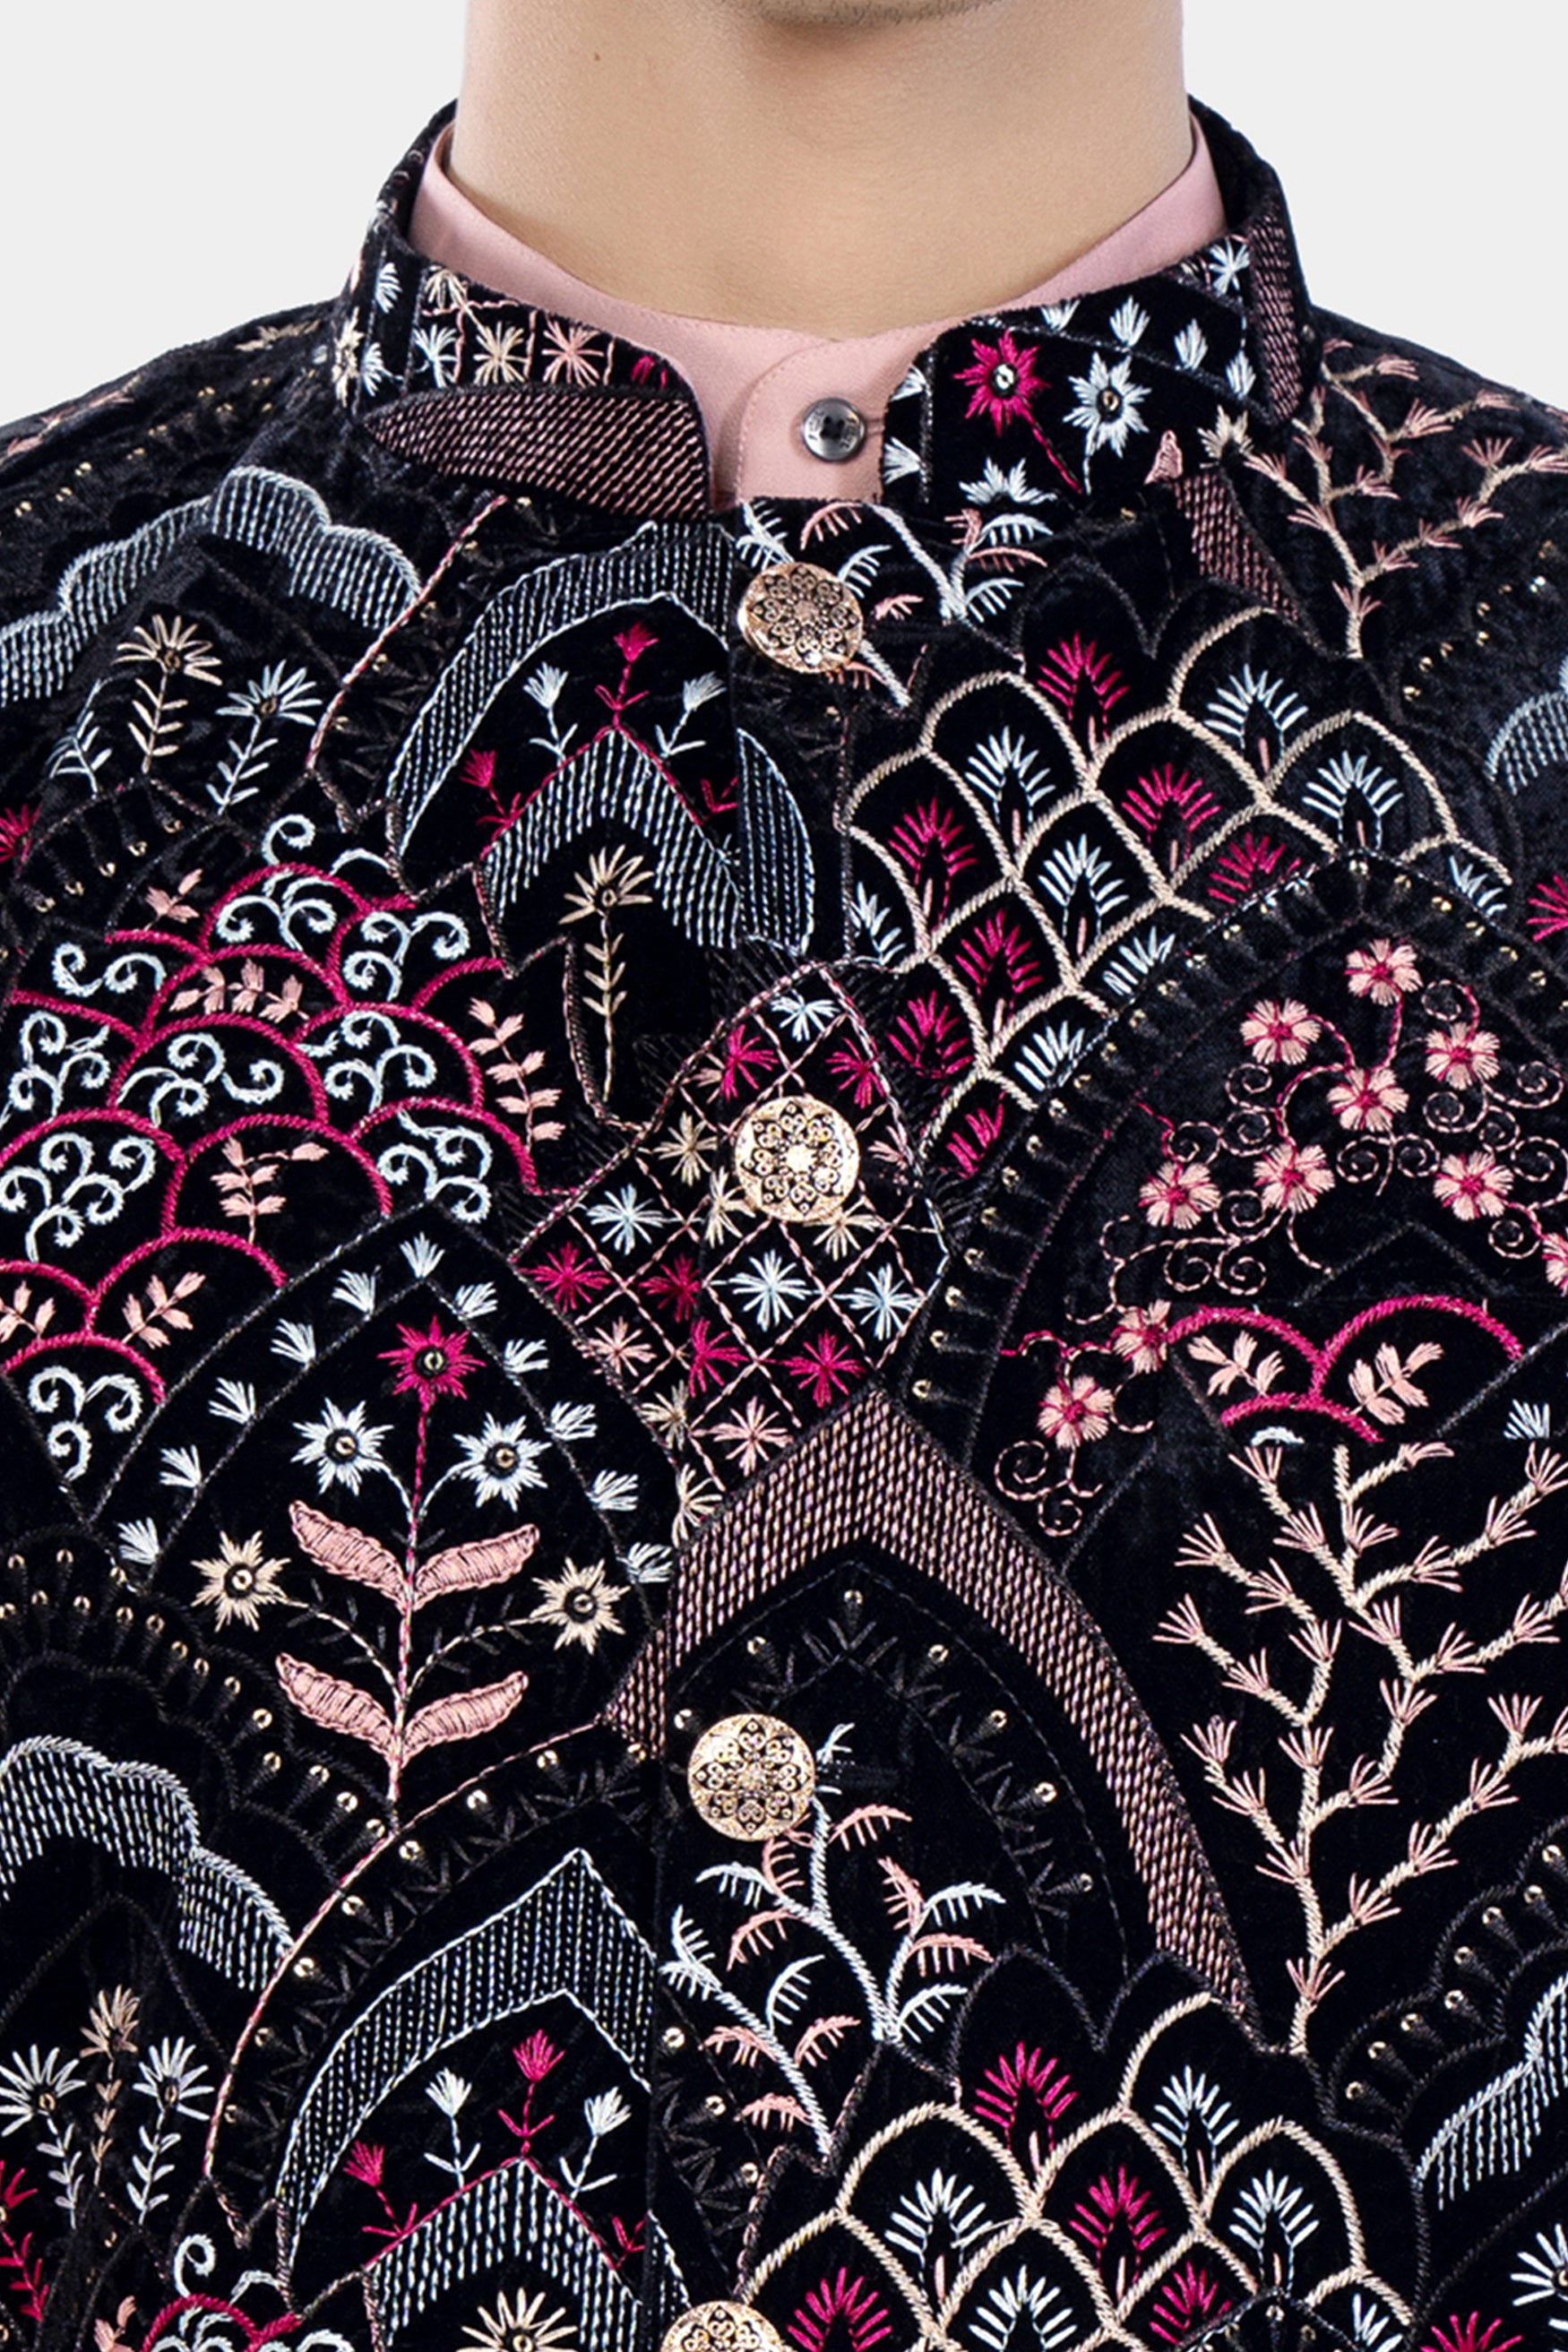 Jade Black Multicolour Floral Thread and Sequin Embroidered Designer Nehru Jacket WC3470-36,  WC3470-38,  WC3470-40,  WC3470-42,  WC3470-44,  WC3470-46,  WC3470-48,  WC3470-50,  WC3470-52,  WC3470-54,  WC3470-56,  WC3470-58,  WC3470-60